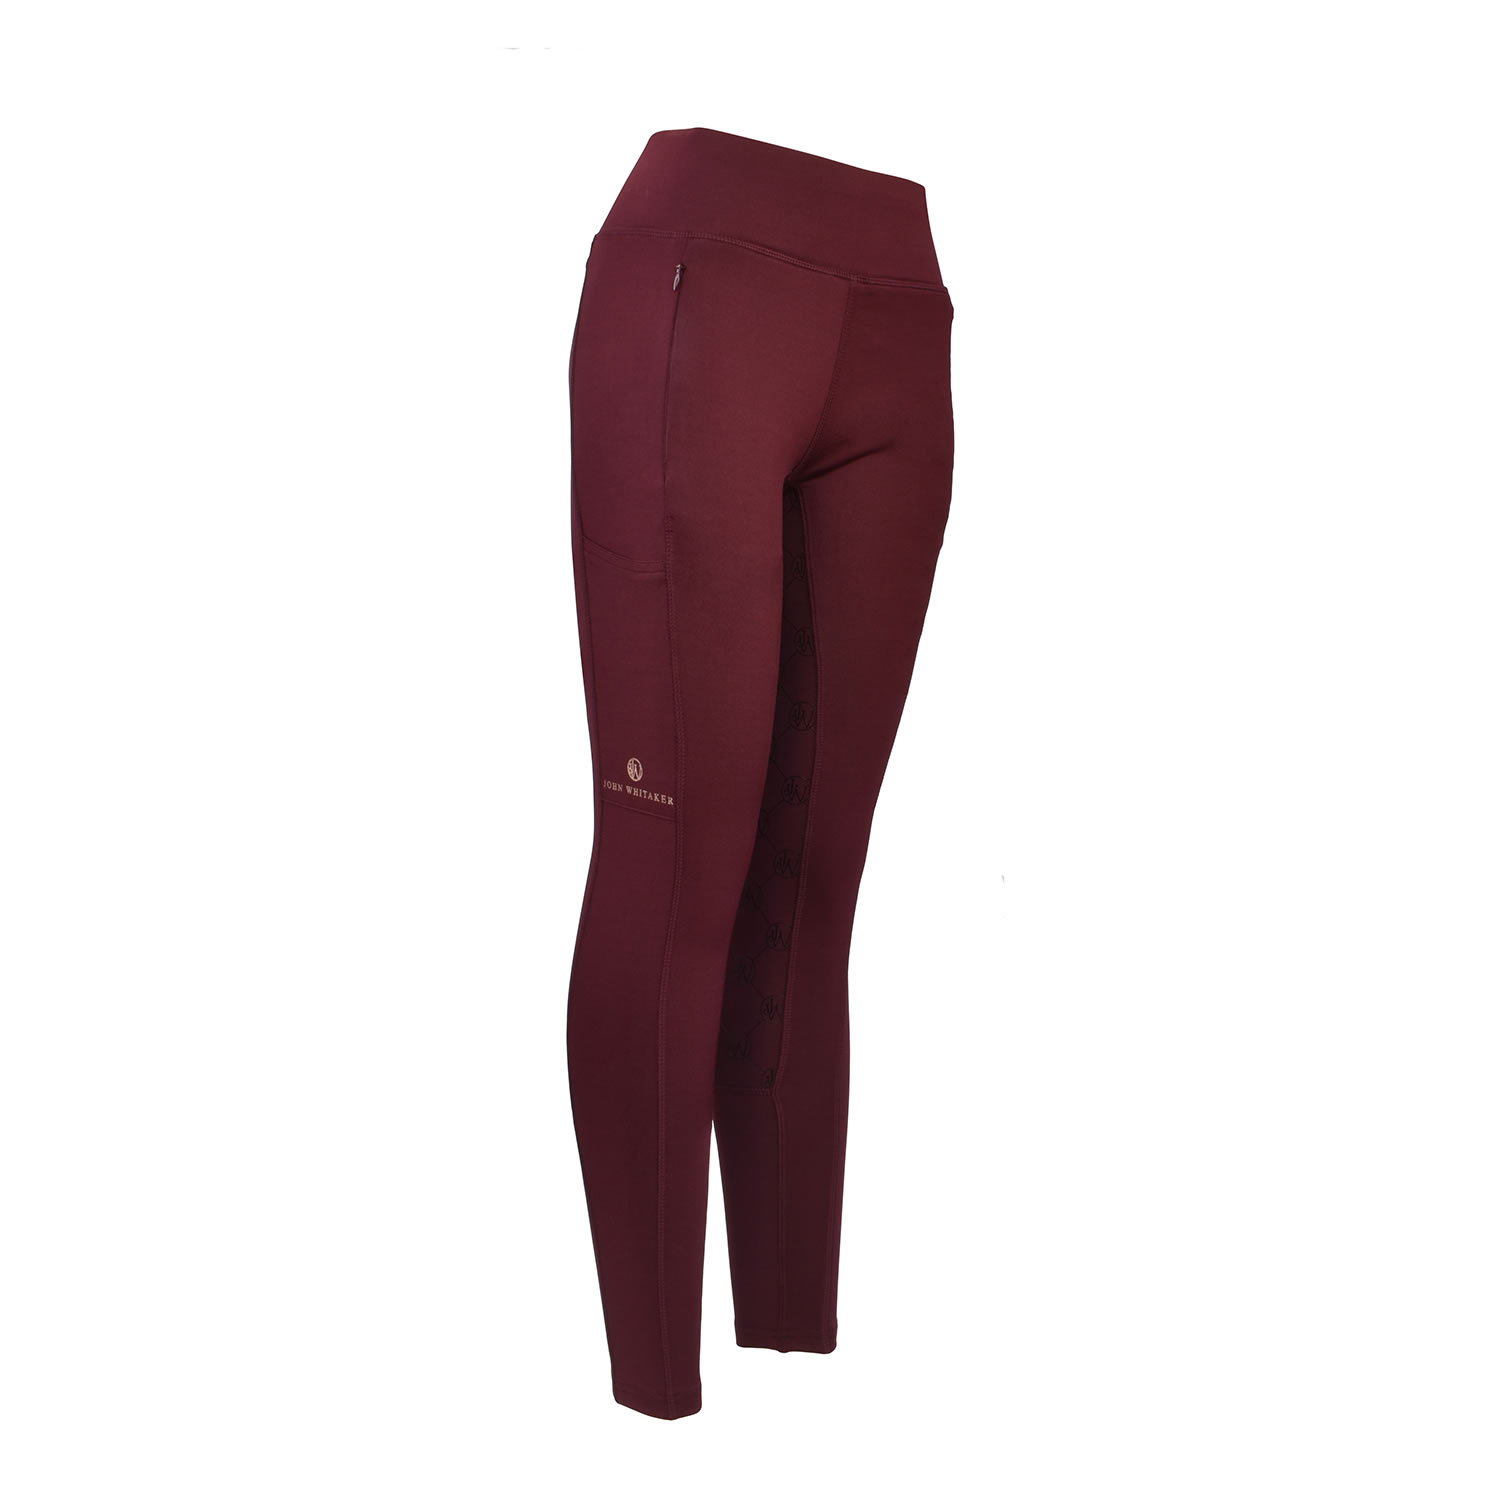 NEW WHITAKER LEGEND BASE-LAYER BURGUNDY BREATHABLE ALL SIZES 